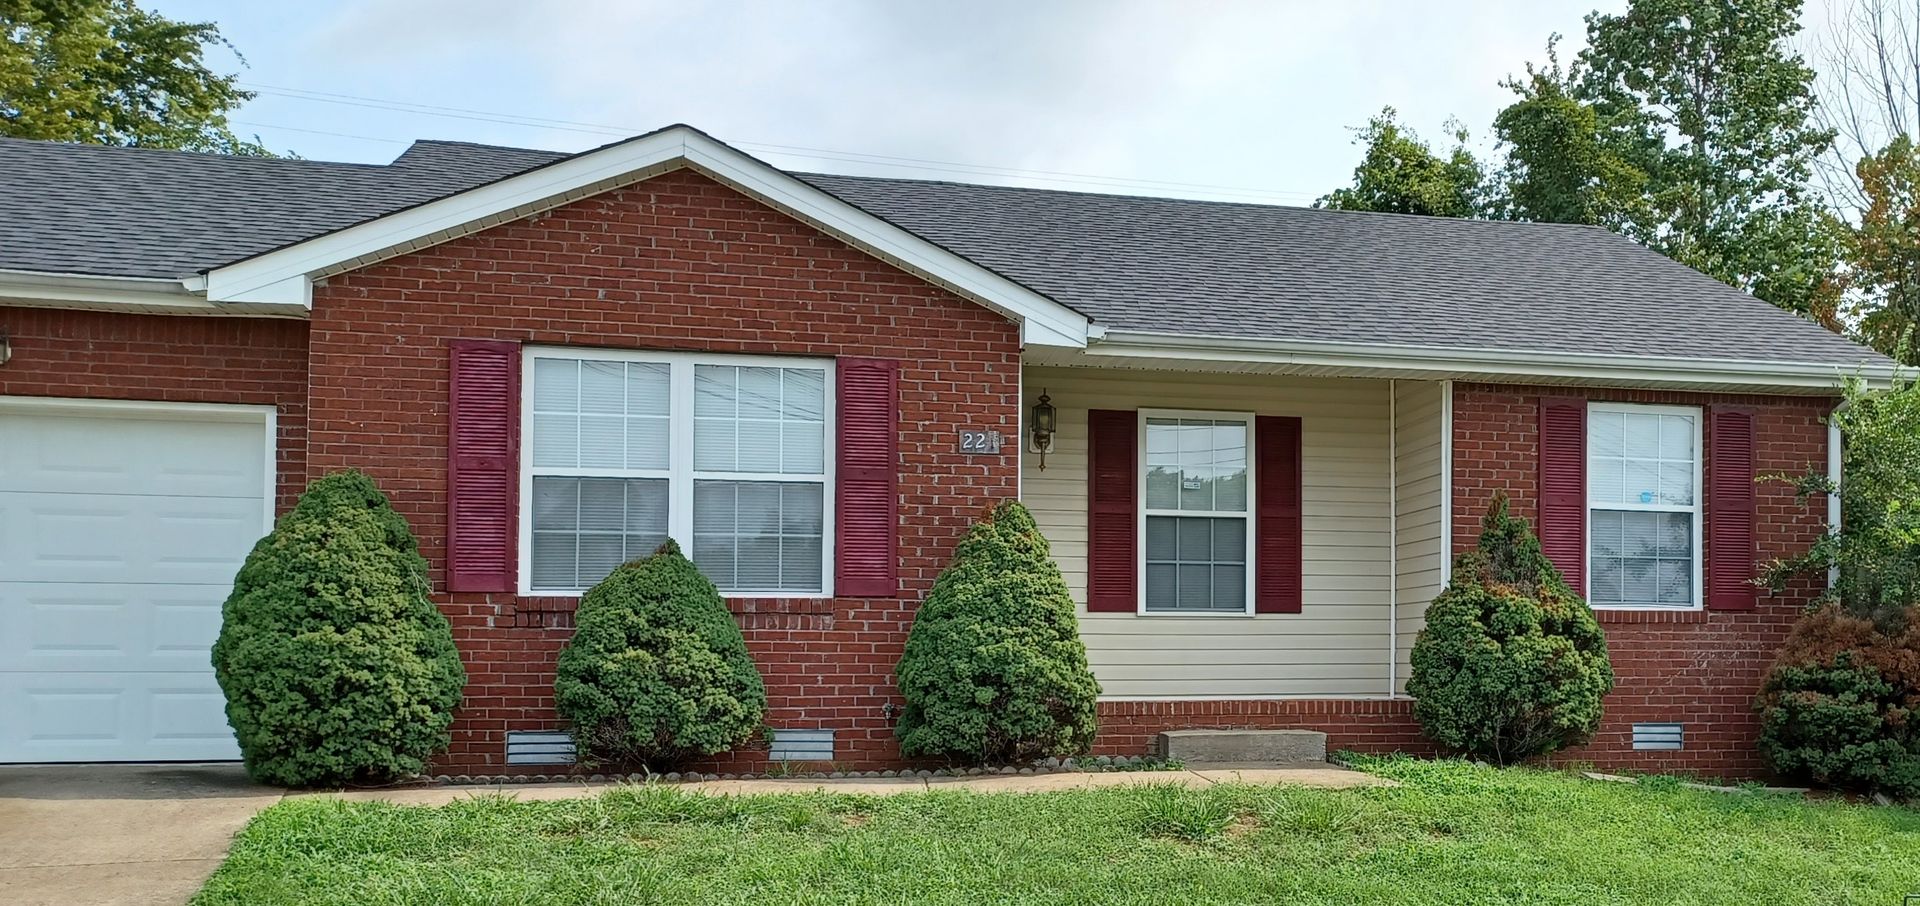 Coming Soon! Cute home close to Fort Campbell